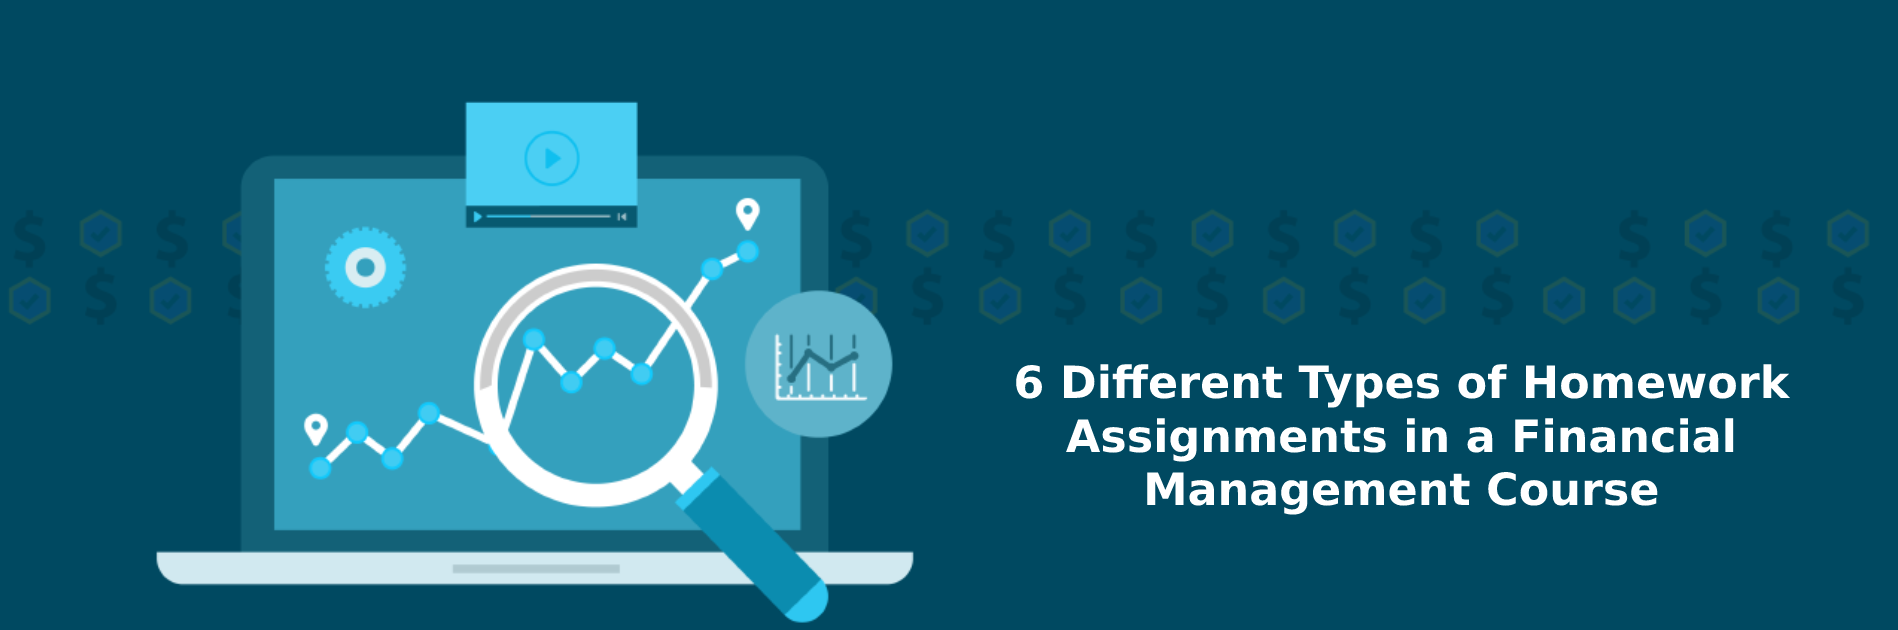 Different-Types-of-Assignments-in-a-Financial-Management-Course